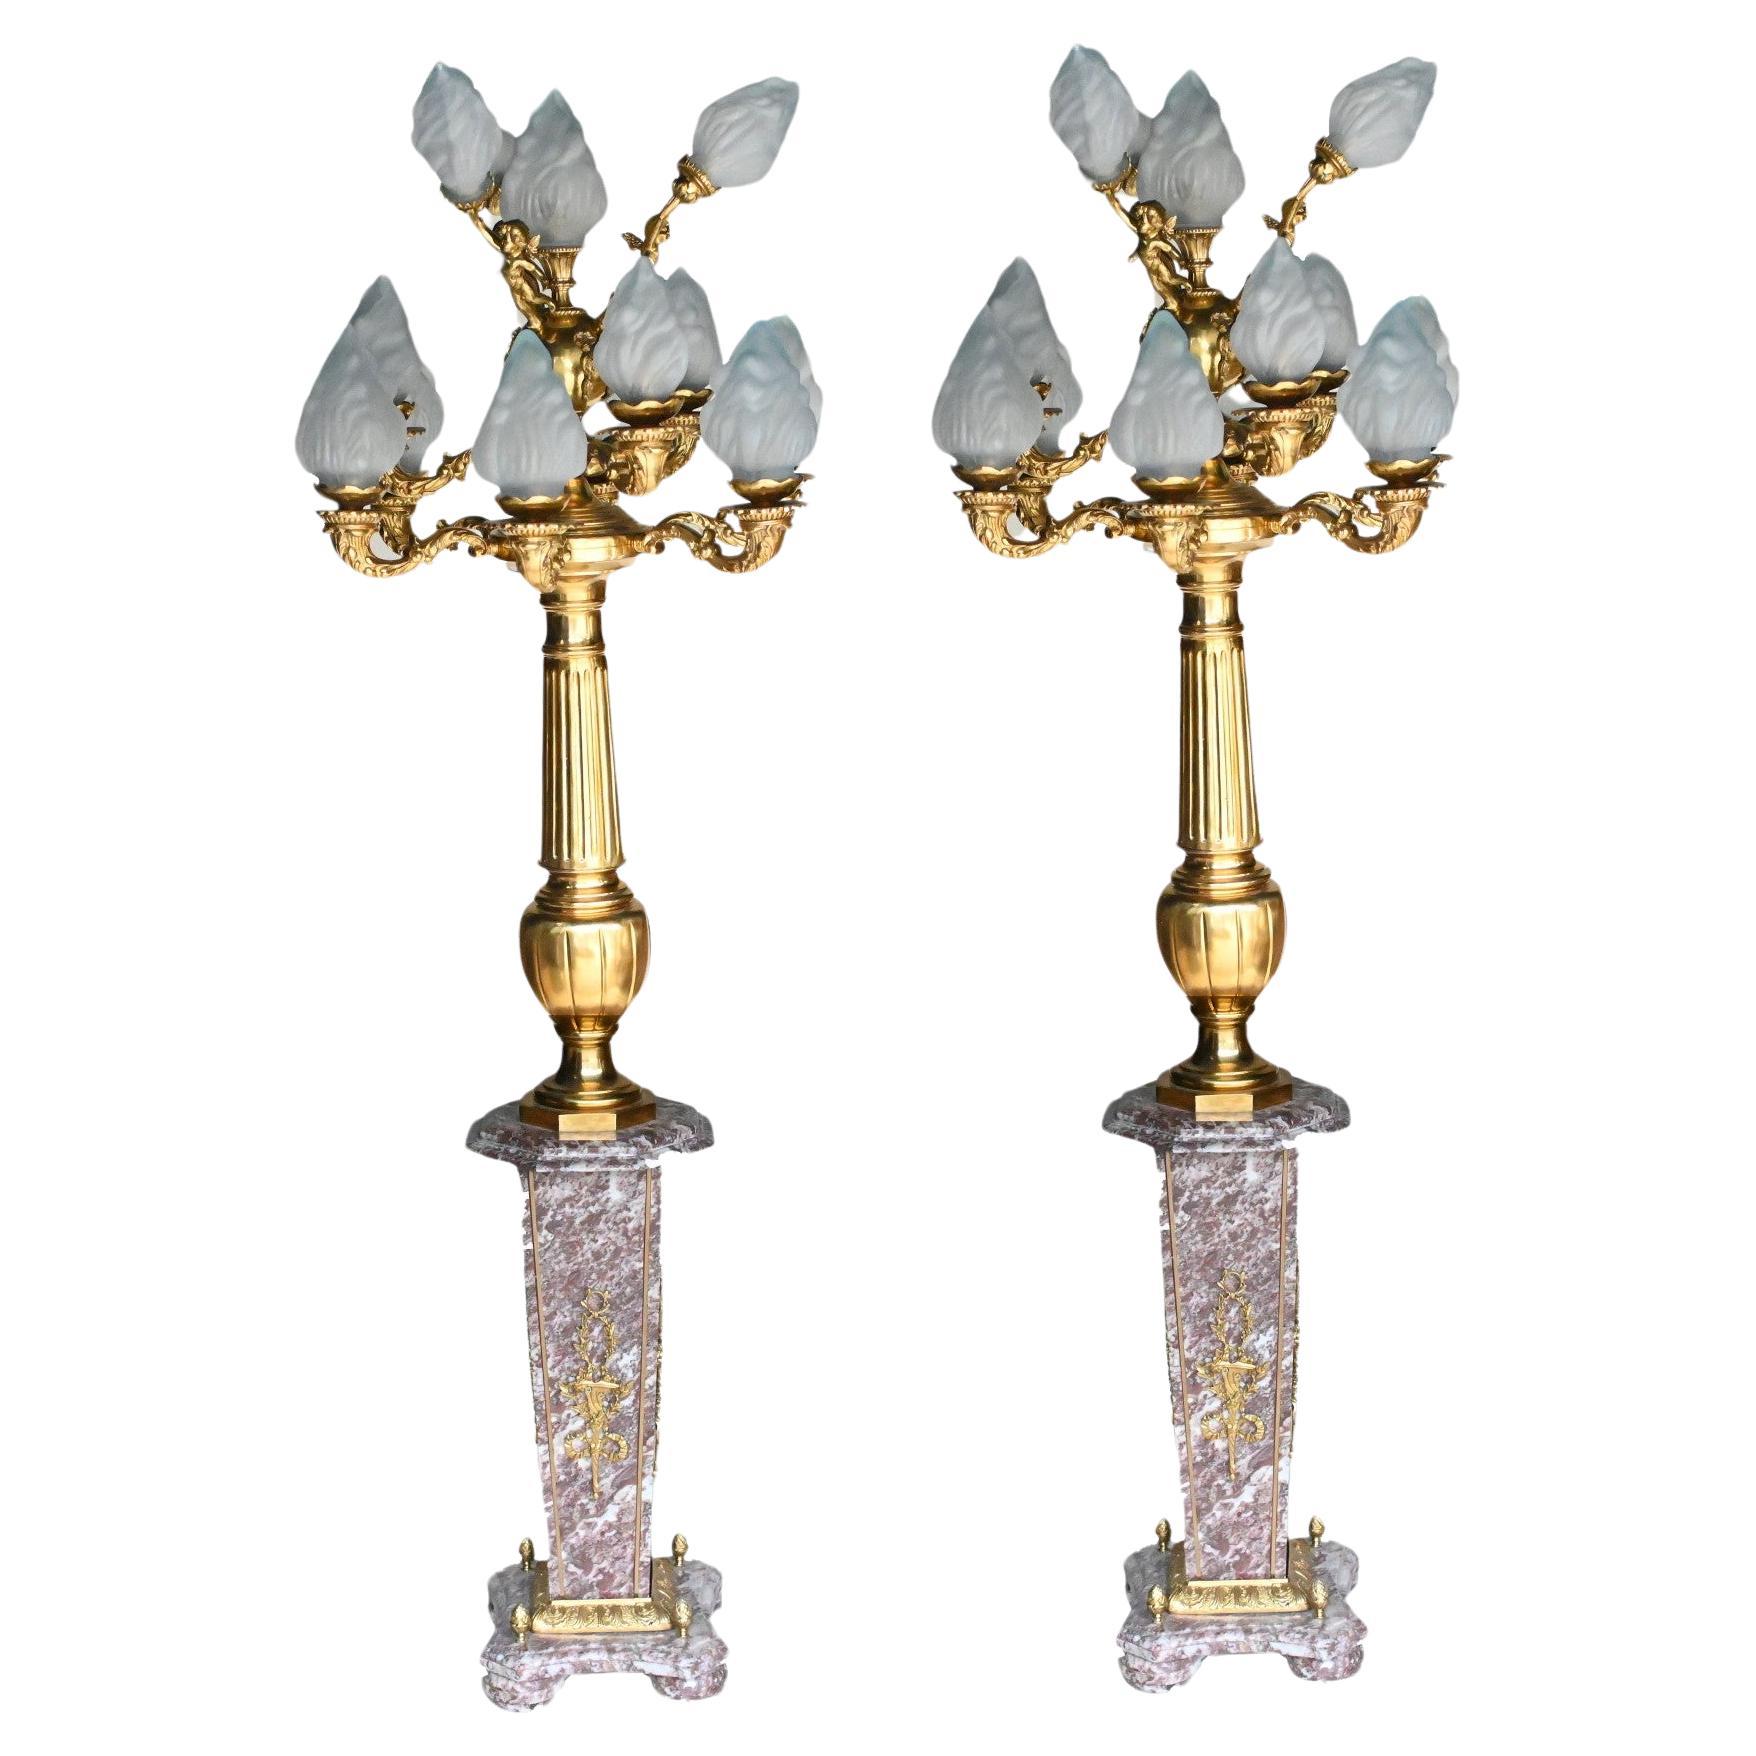 Pair Big French Floor Lamps Marble Gilt Architectural Lights Candelabras For Sale